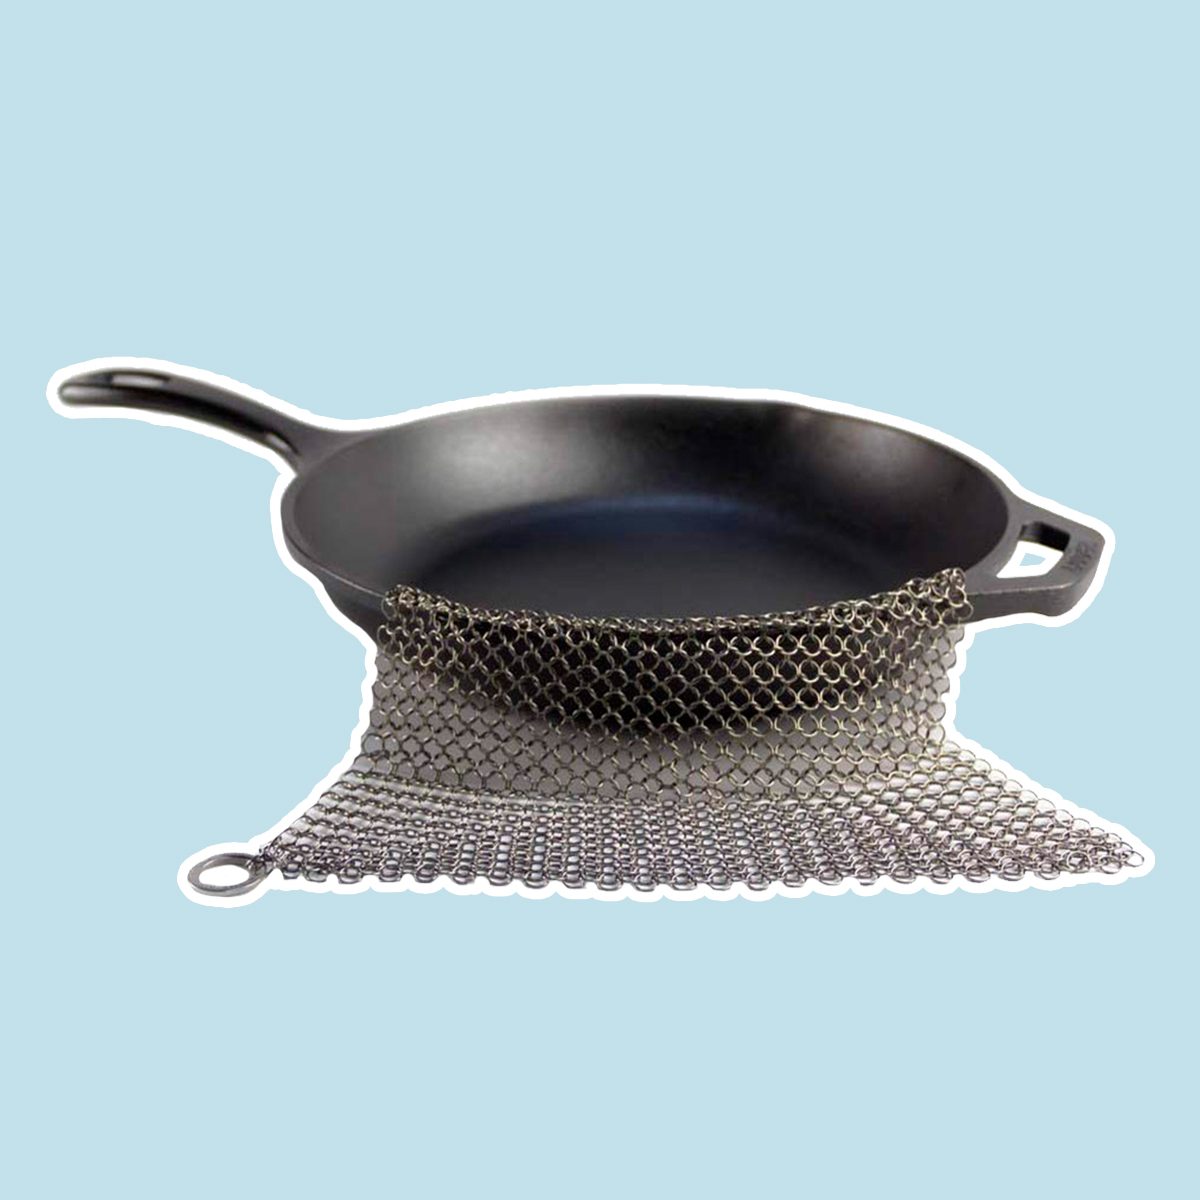 The Ringer - The Original Stainless Steel Cast Iron Cleaner, Patented XL 8x6 Inch Design